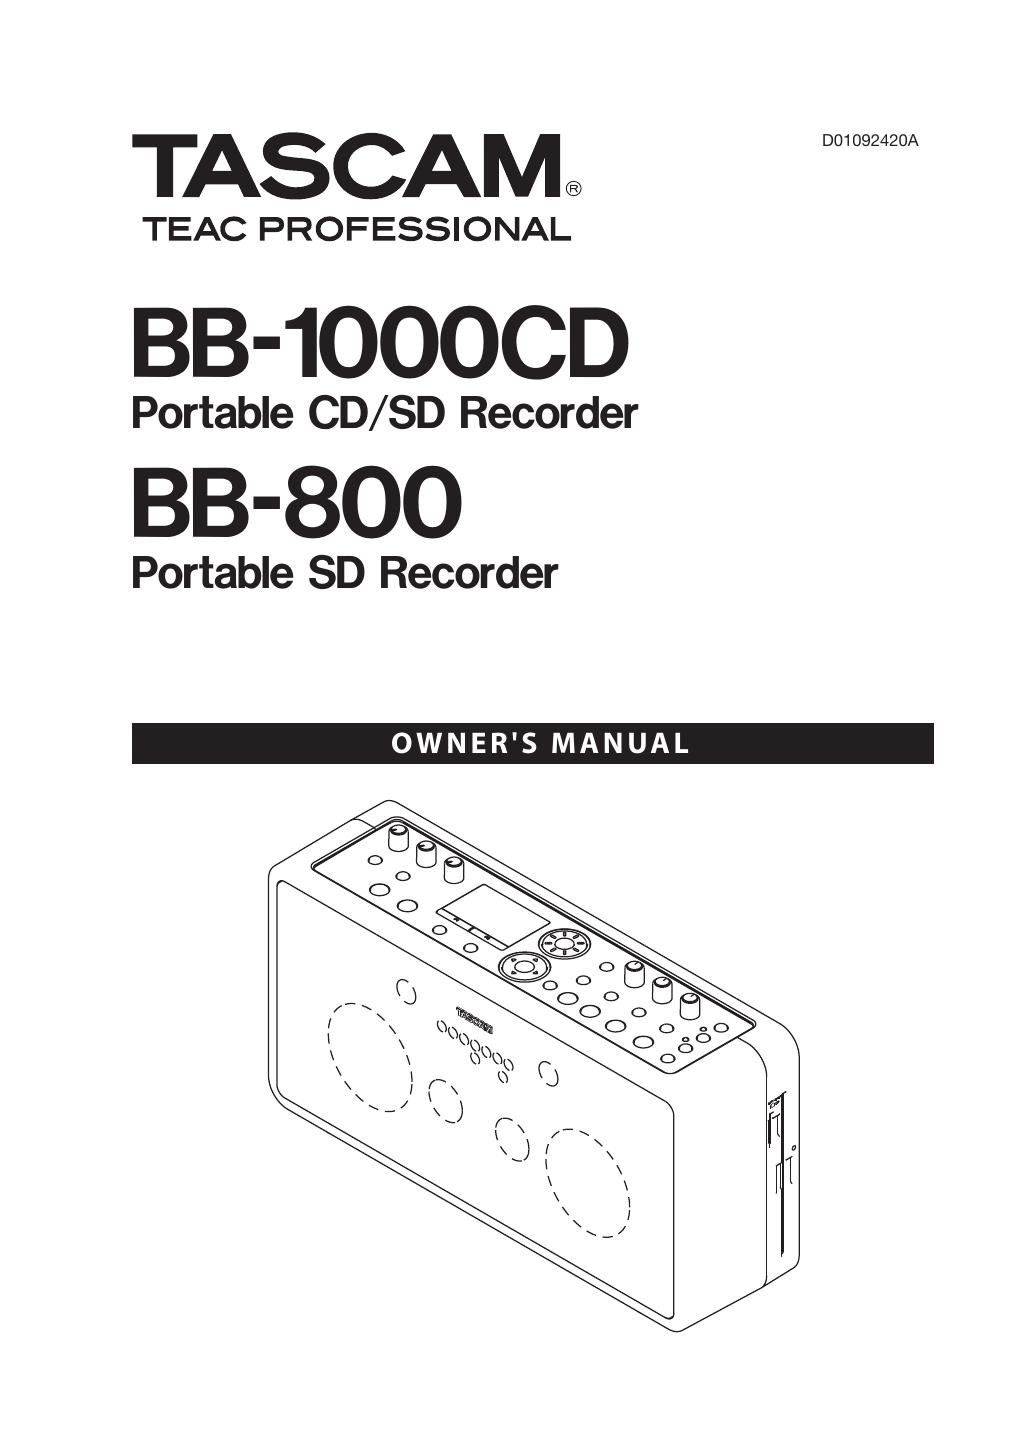 Tascam BB 1000CD BB 800 Owners Manual